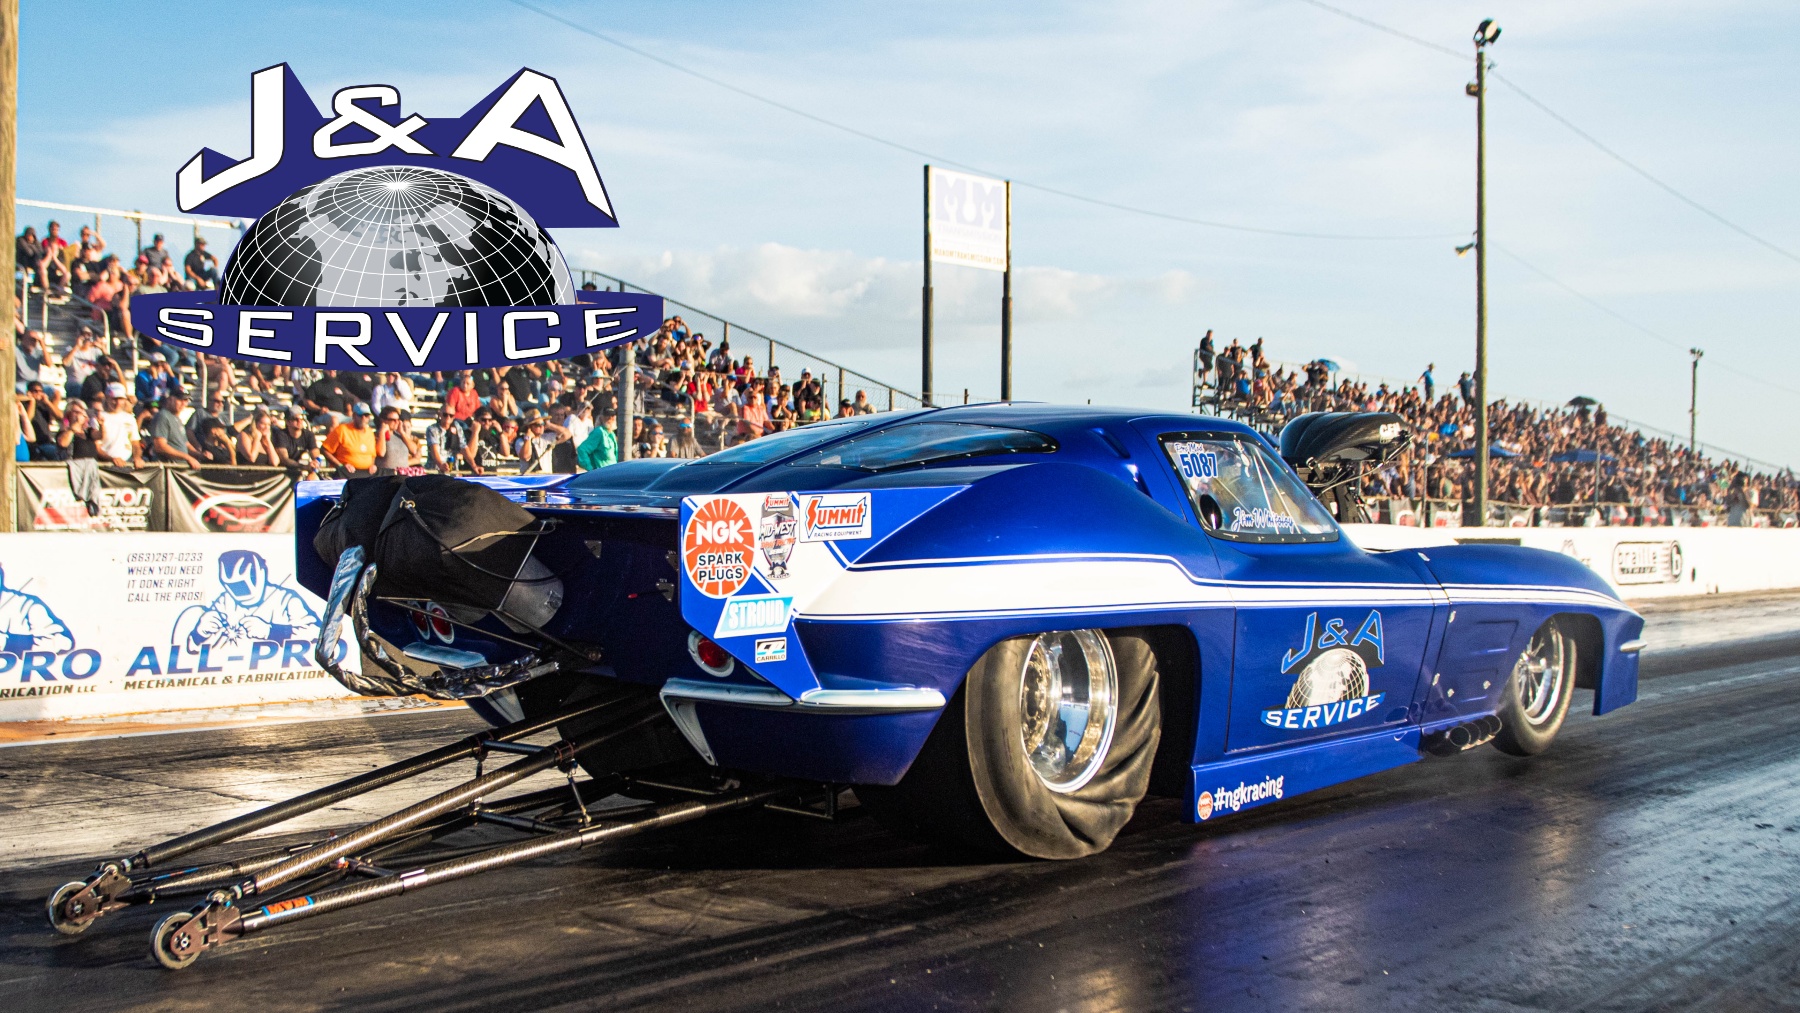 JandA Service Named Presenting Sponsor of World Series of Pro Mod Drag Illustrated Drag Racing News, Opinion, Interviews, Photos, Videos and More